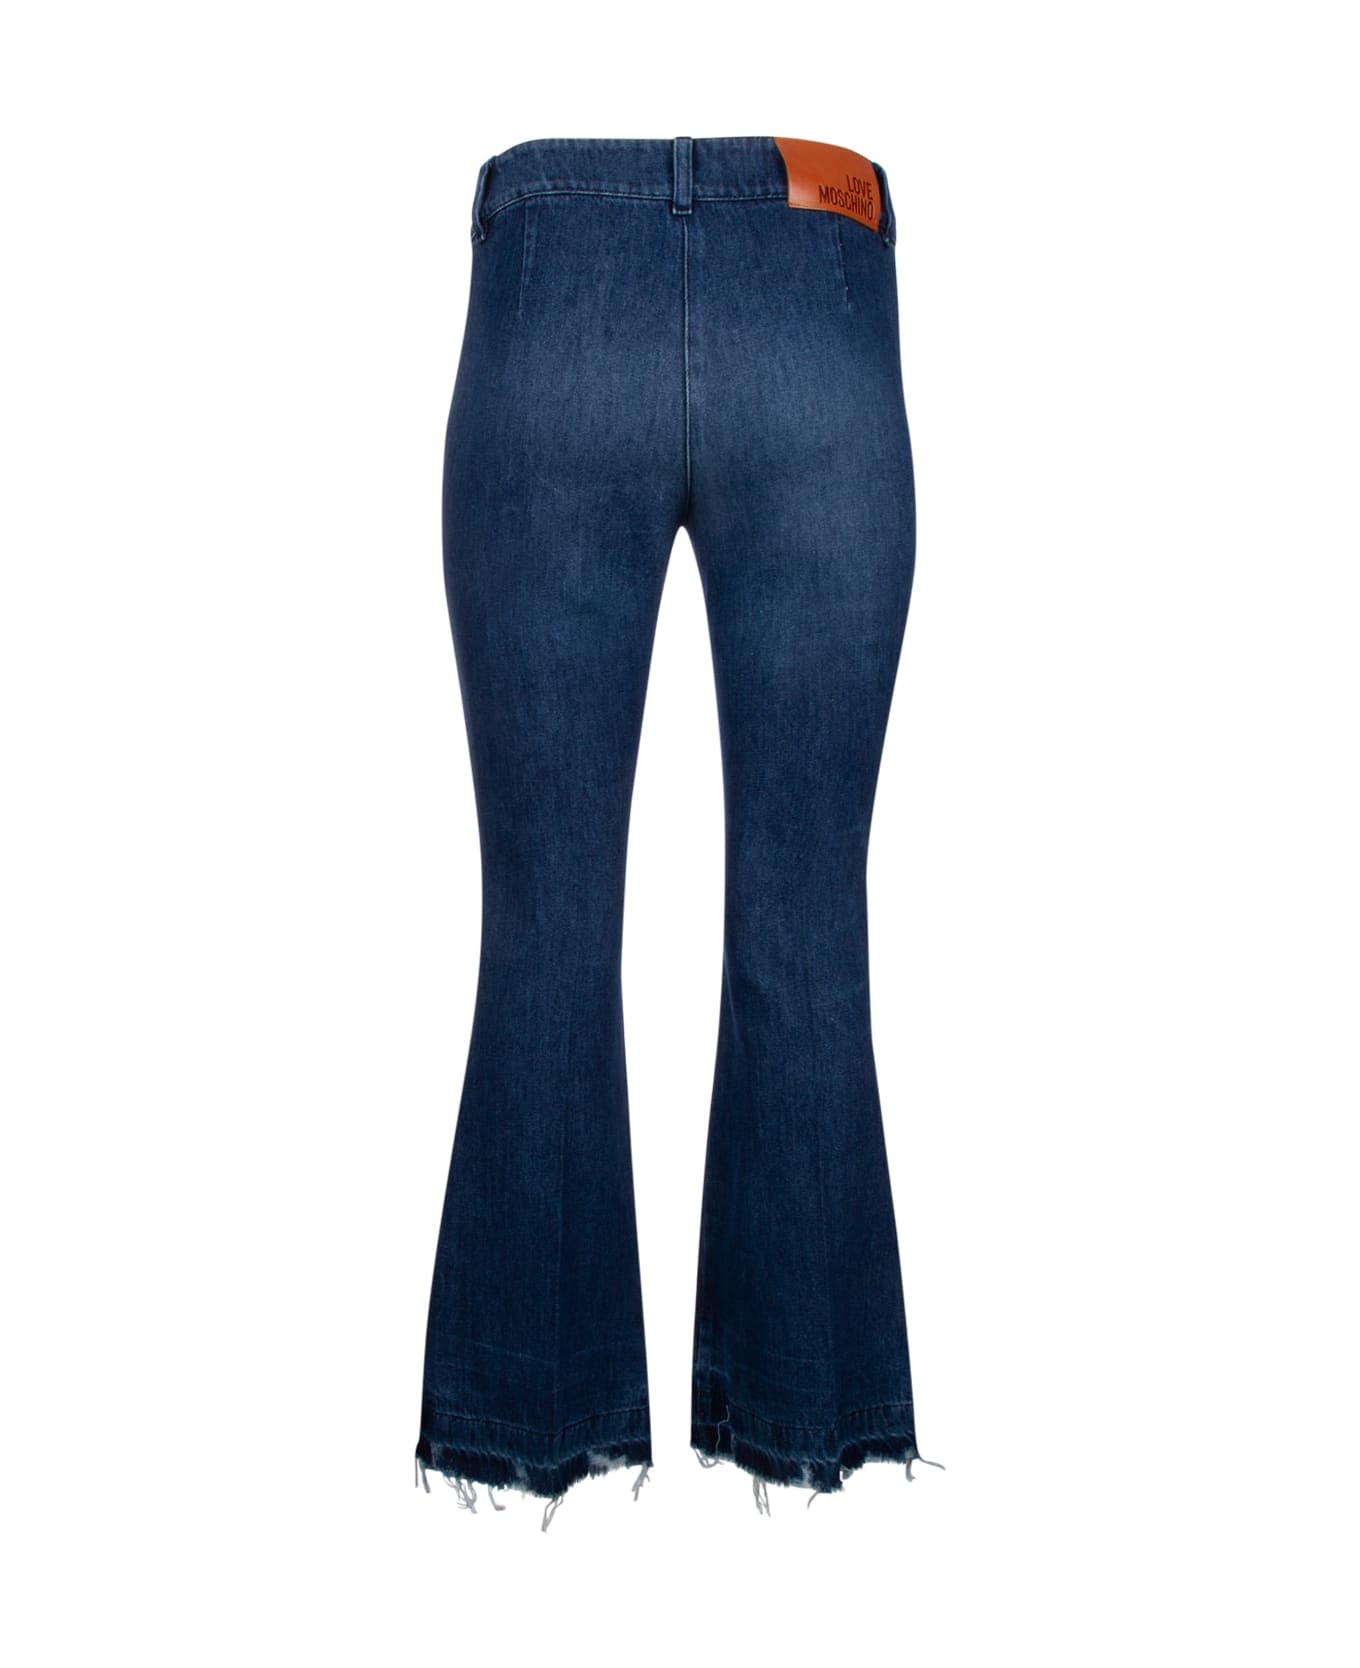 Love Moschino Jeans - 053W